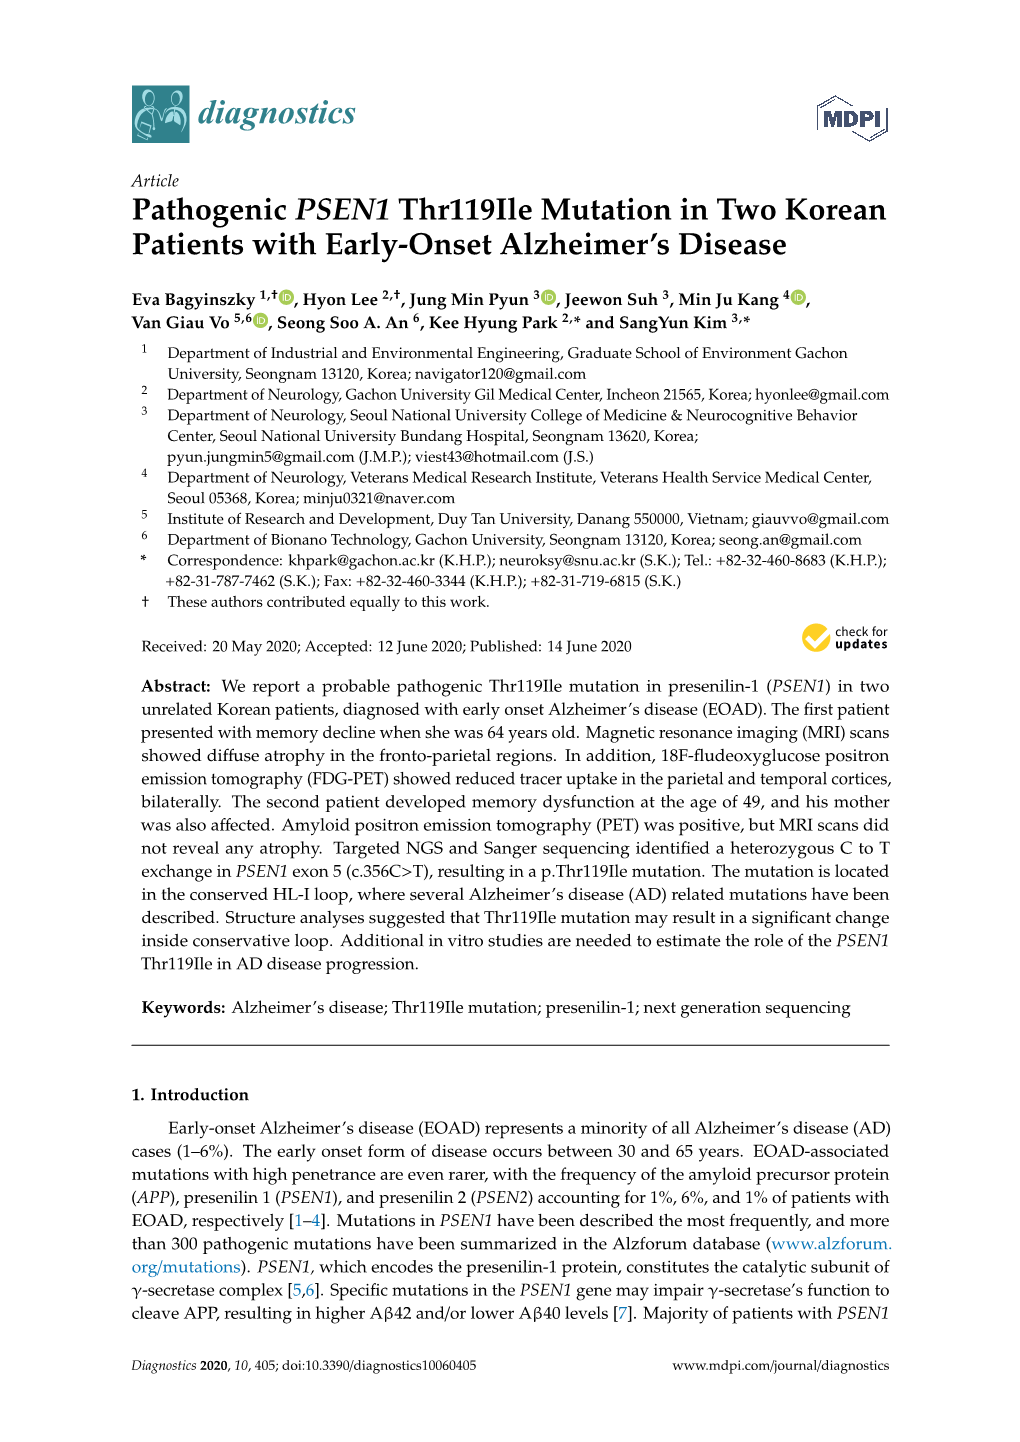 Pathogenic PSEN1 Thr119ile Mutation in Two Korean Patients with Early-Onset Alzheimer’S Disease